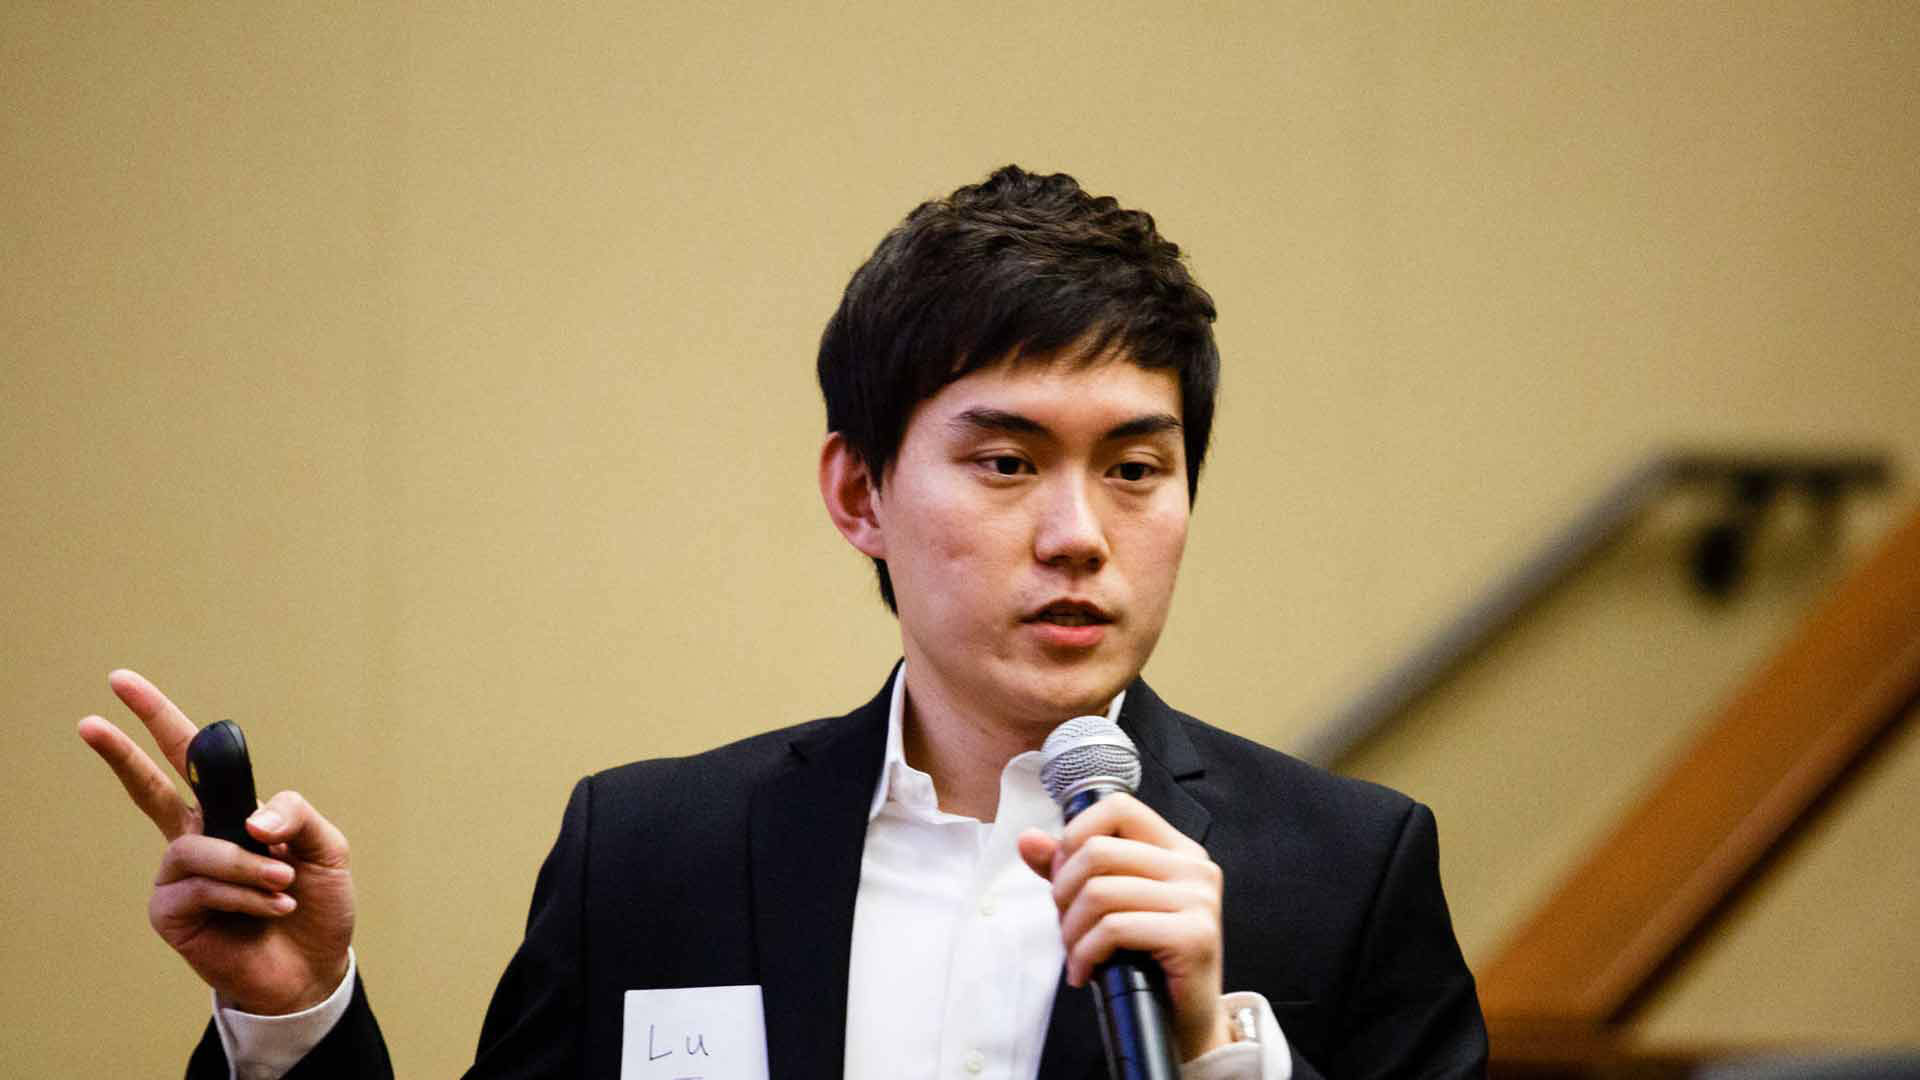 International student Lu Chen speaks during a business plan competition.